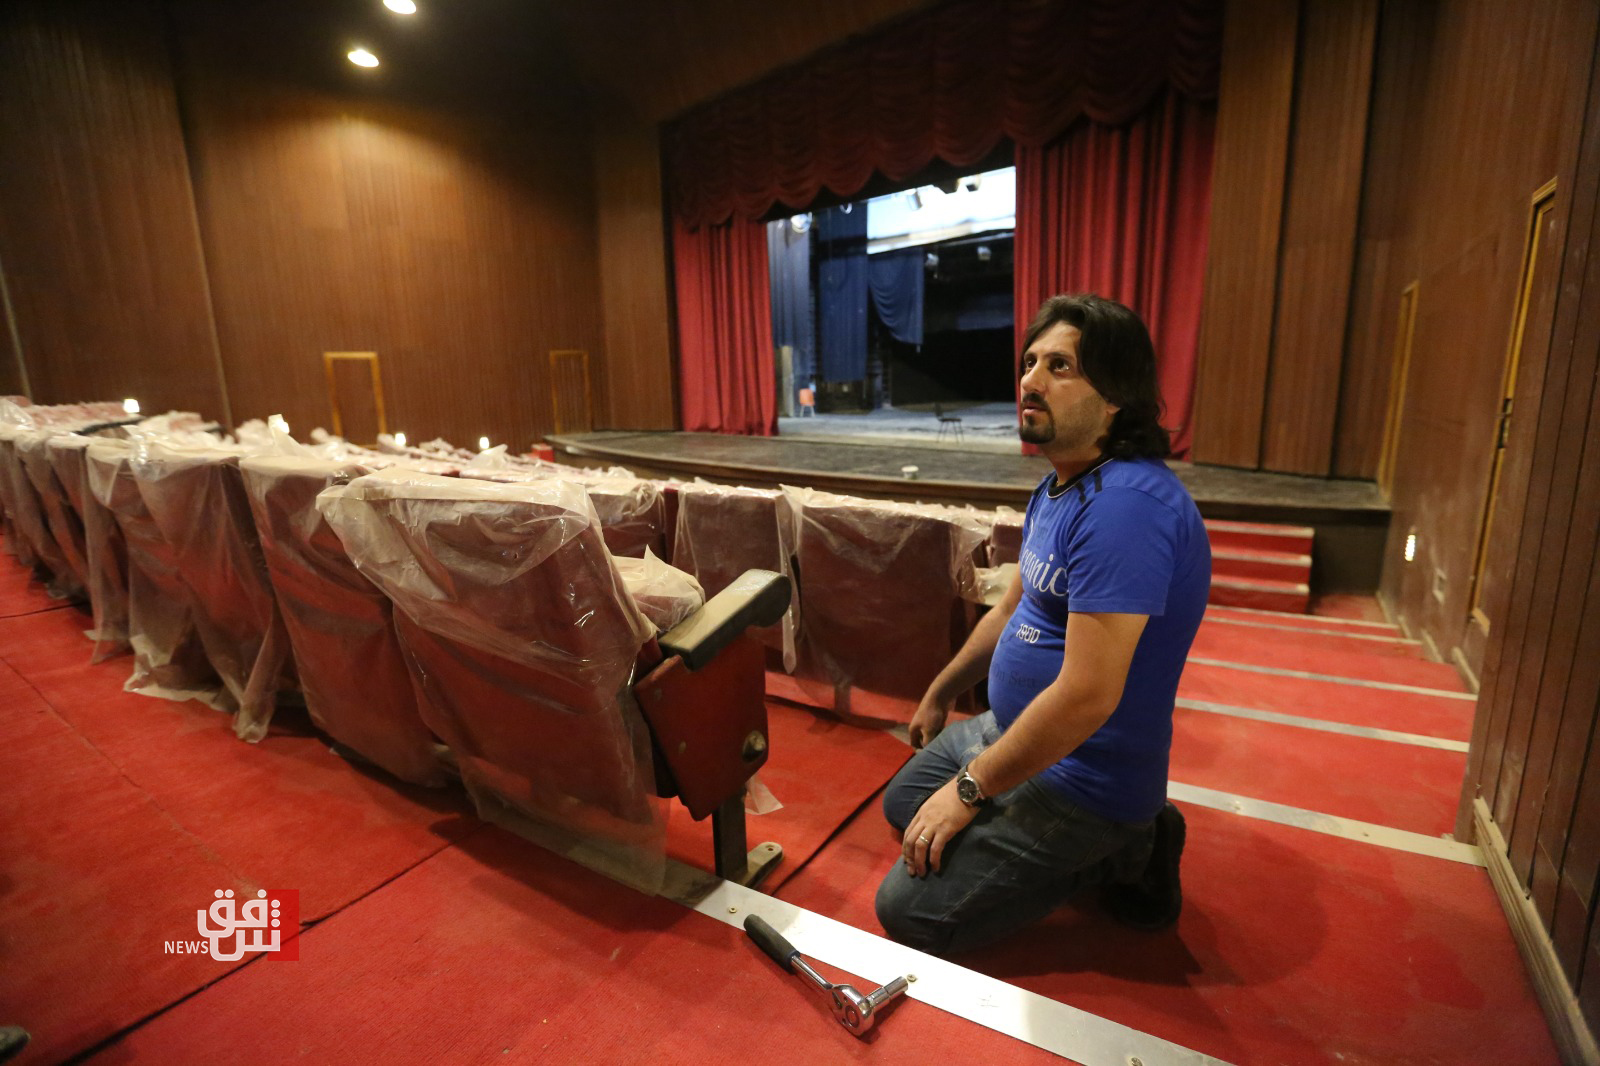 Non-government players step in to revive Al-Rasheed crumbling theater